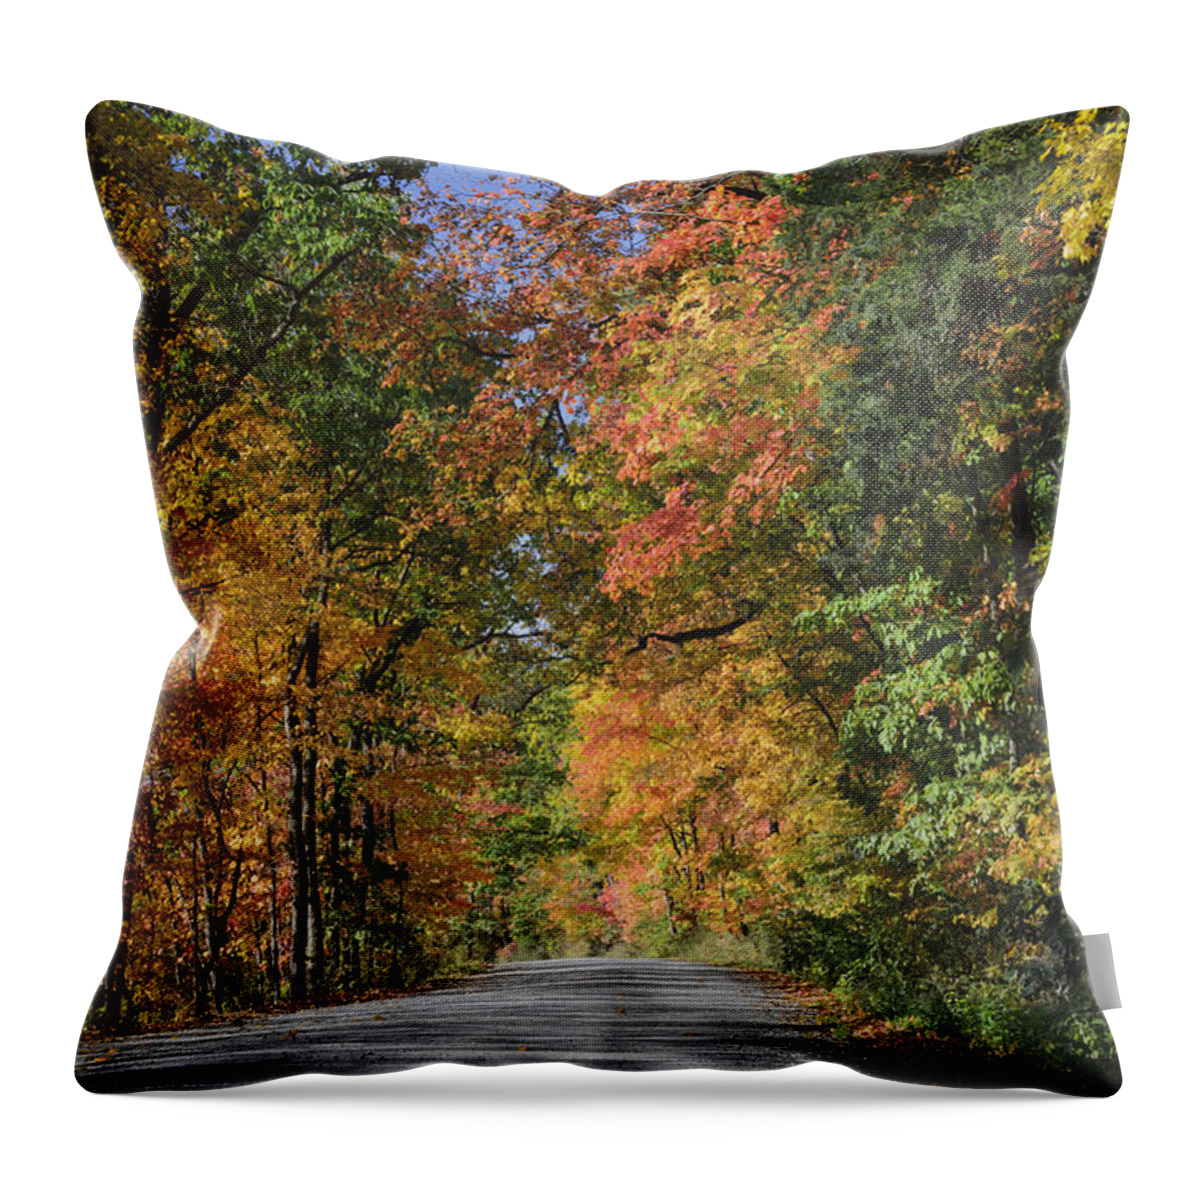 Autumn Throw Pillow featuring the photograph The Road To Color by Tamara Becker